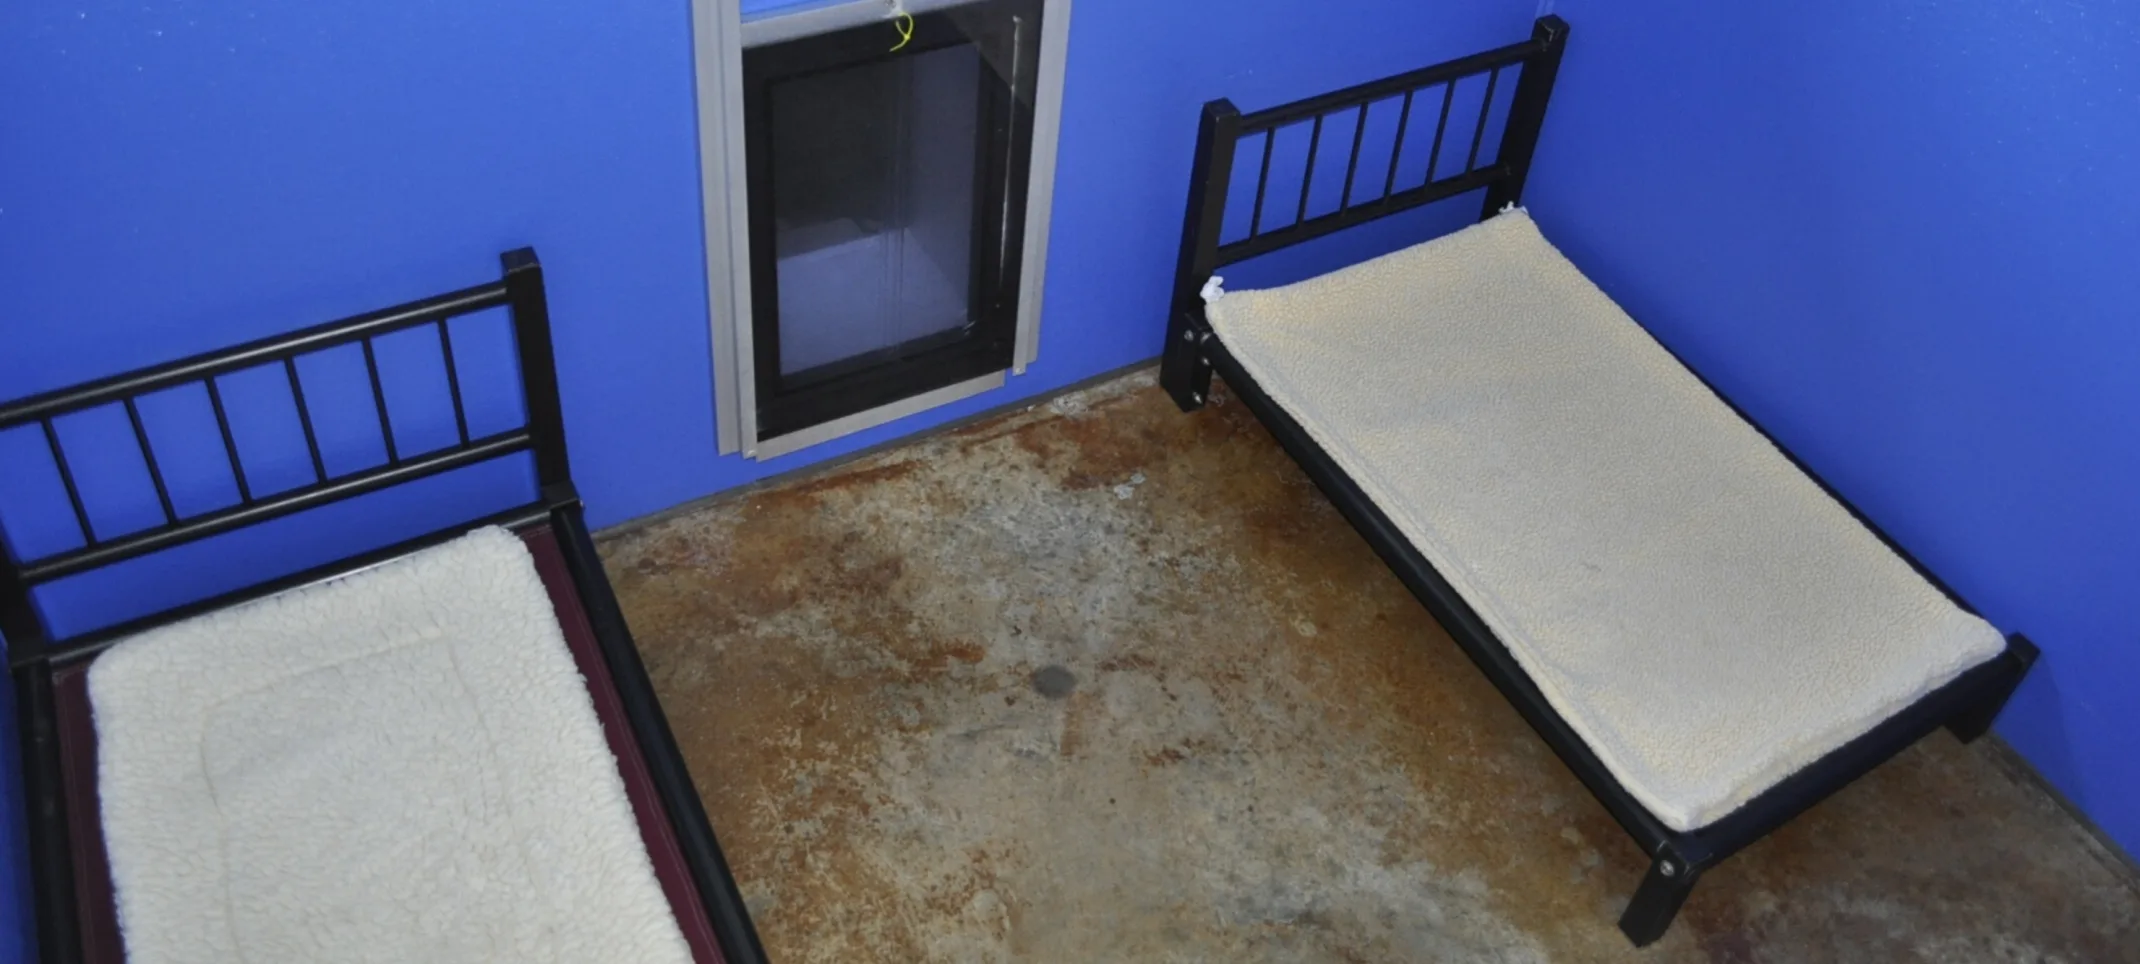 Lafayette Veterinary Care Center Boarding Room with Two Beds